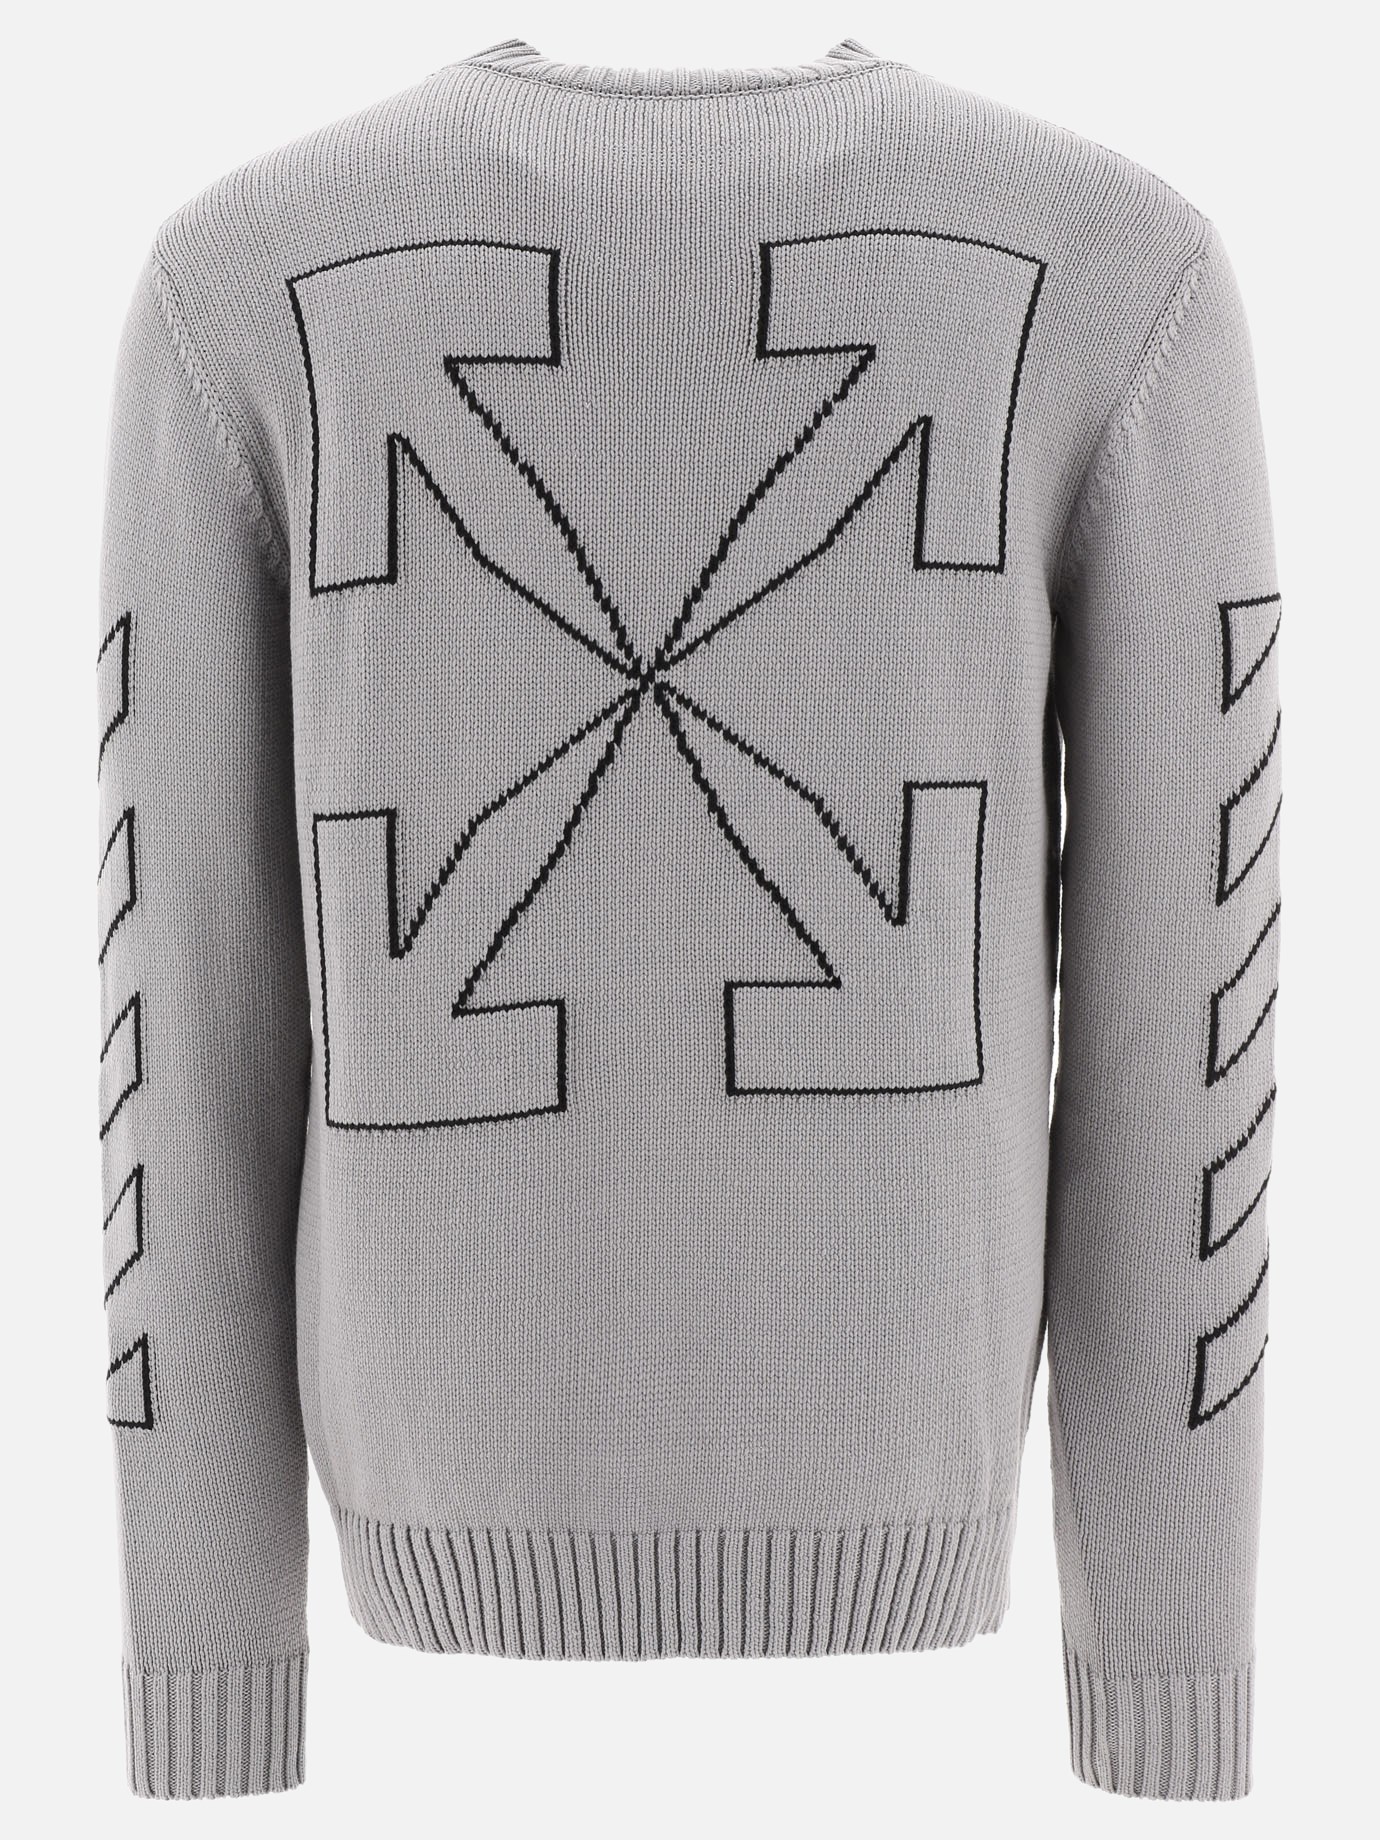  Diag Outline  sweater by Off-White